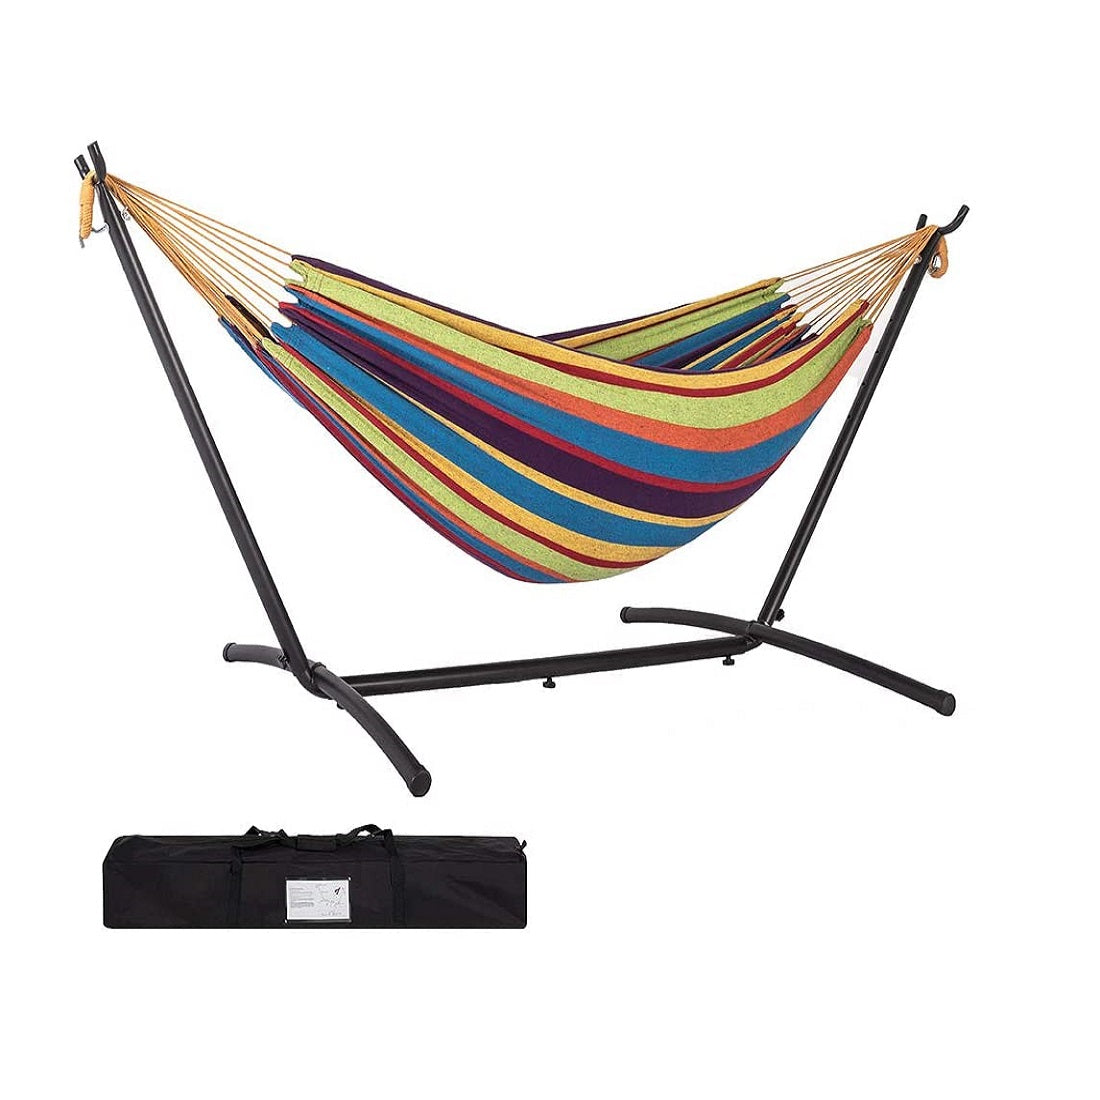 Classic Camping Outdoor Cotton Hammock with 9 Ft Steel Stand Rainbow Striped 450lb Capacity